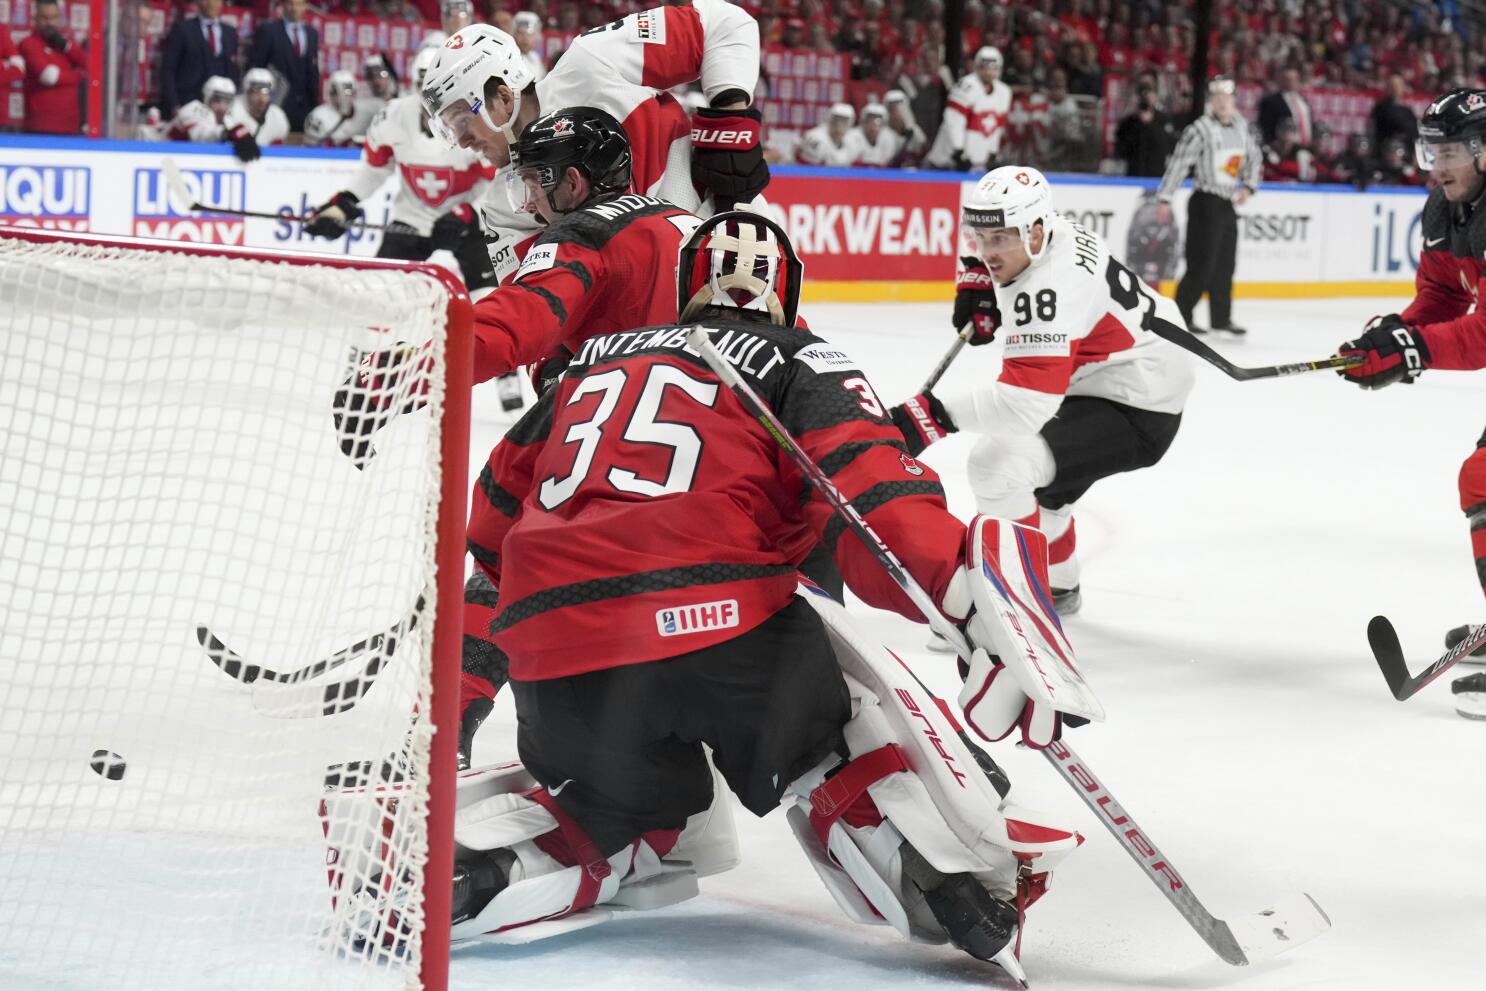 Canada loses to Switzerland, US qualifies for quarters after 5th